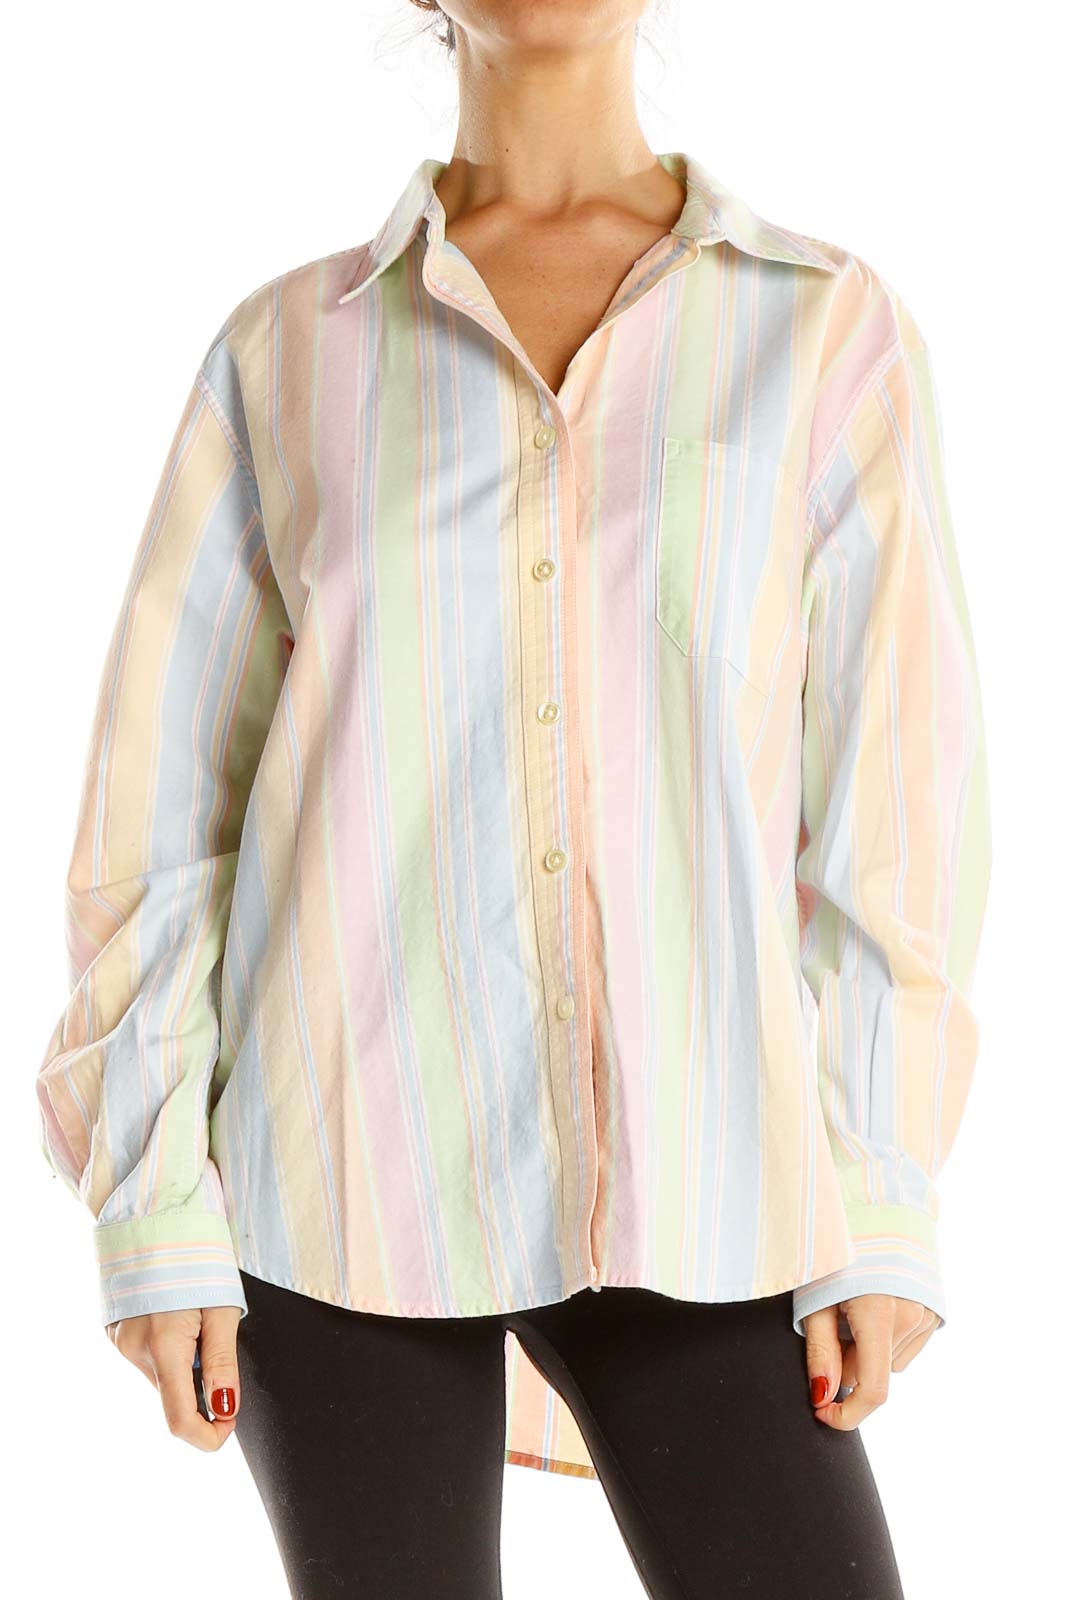 Multicolor Pastel Striped Work Top Front